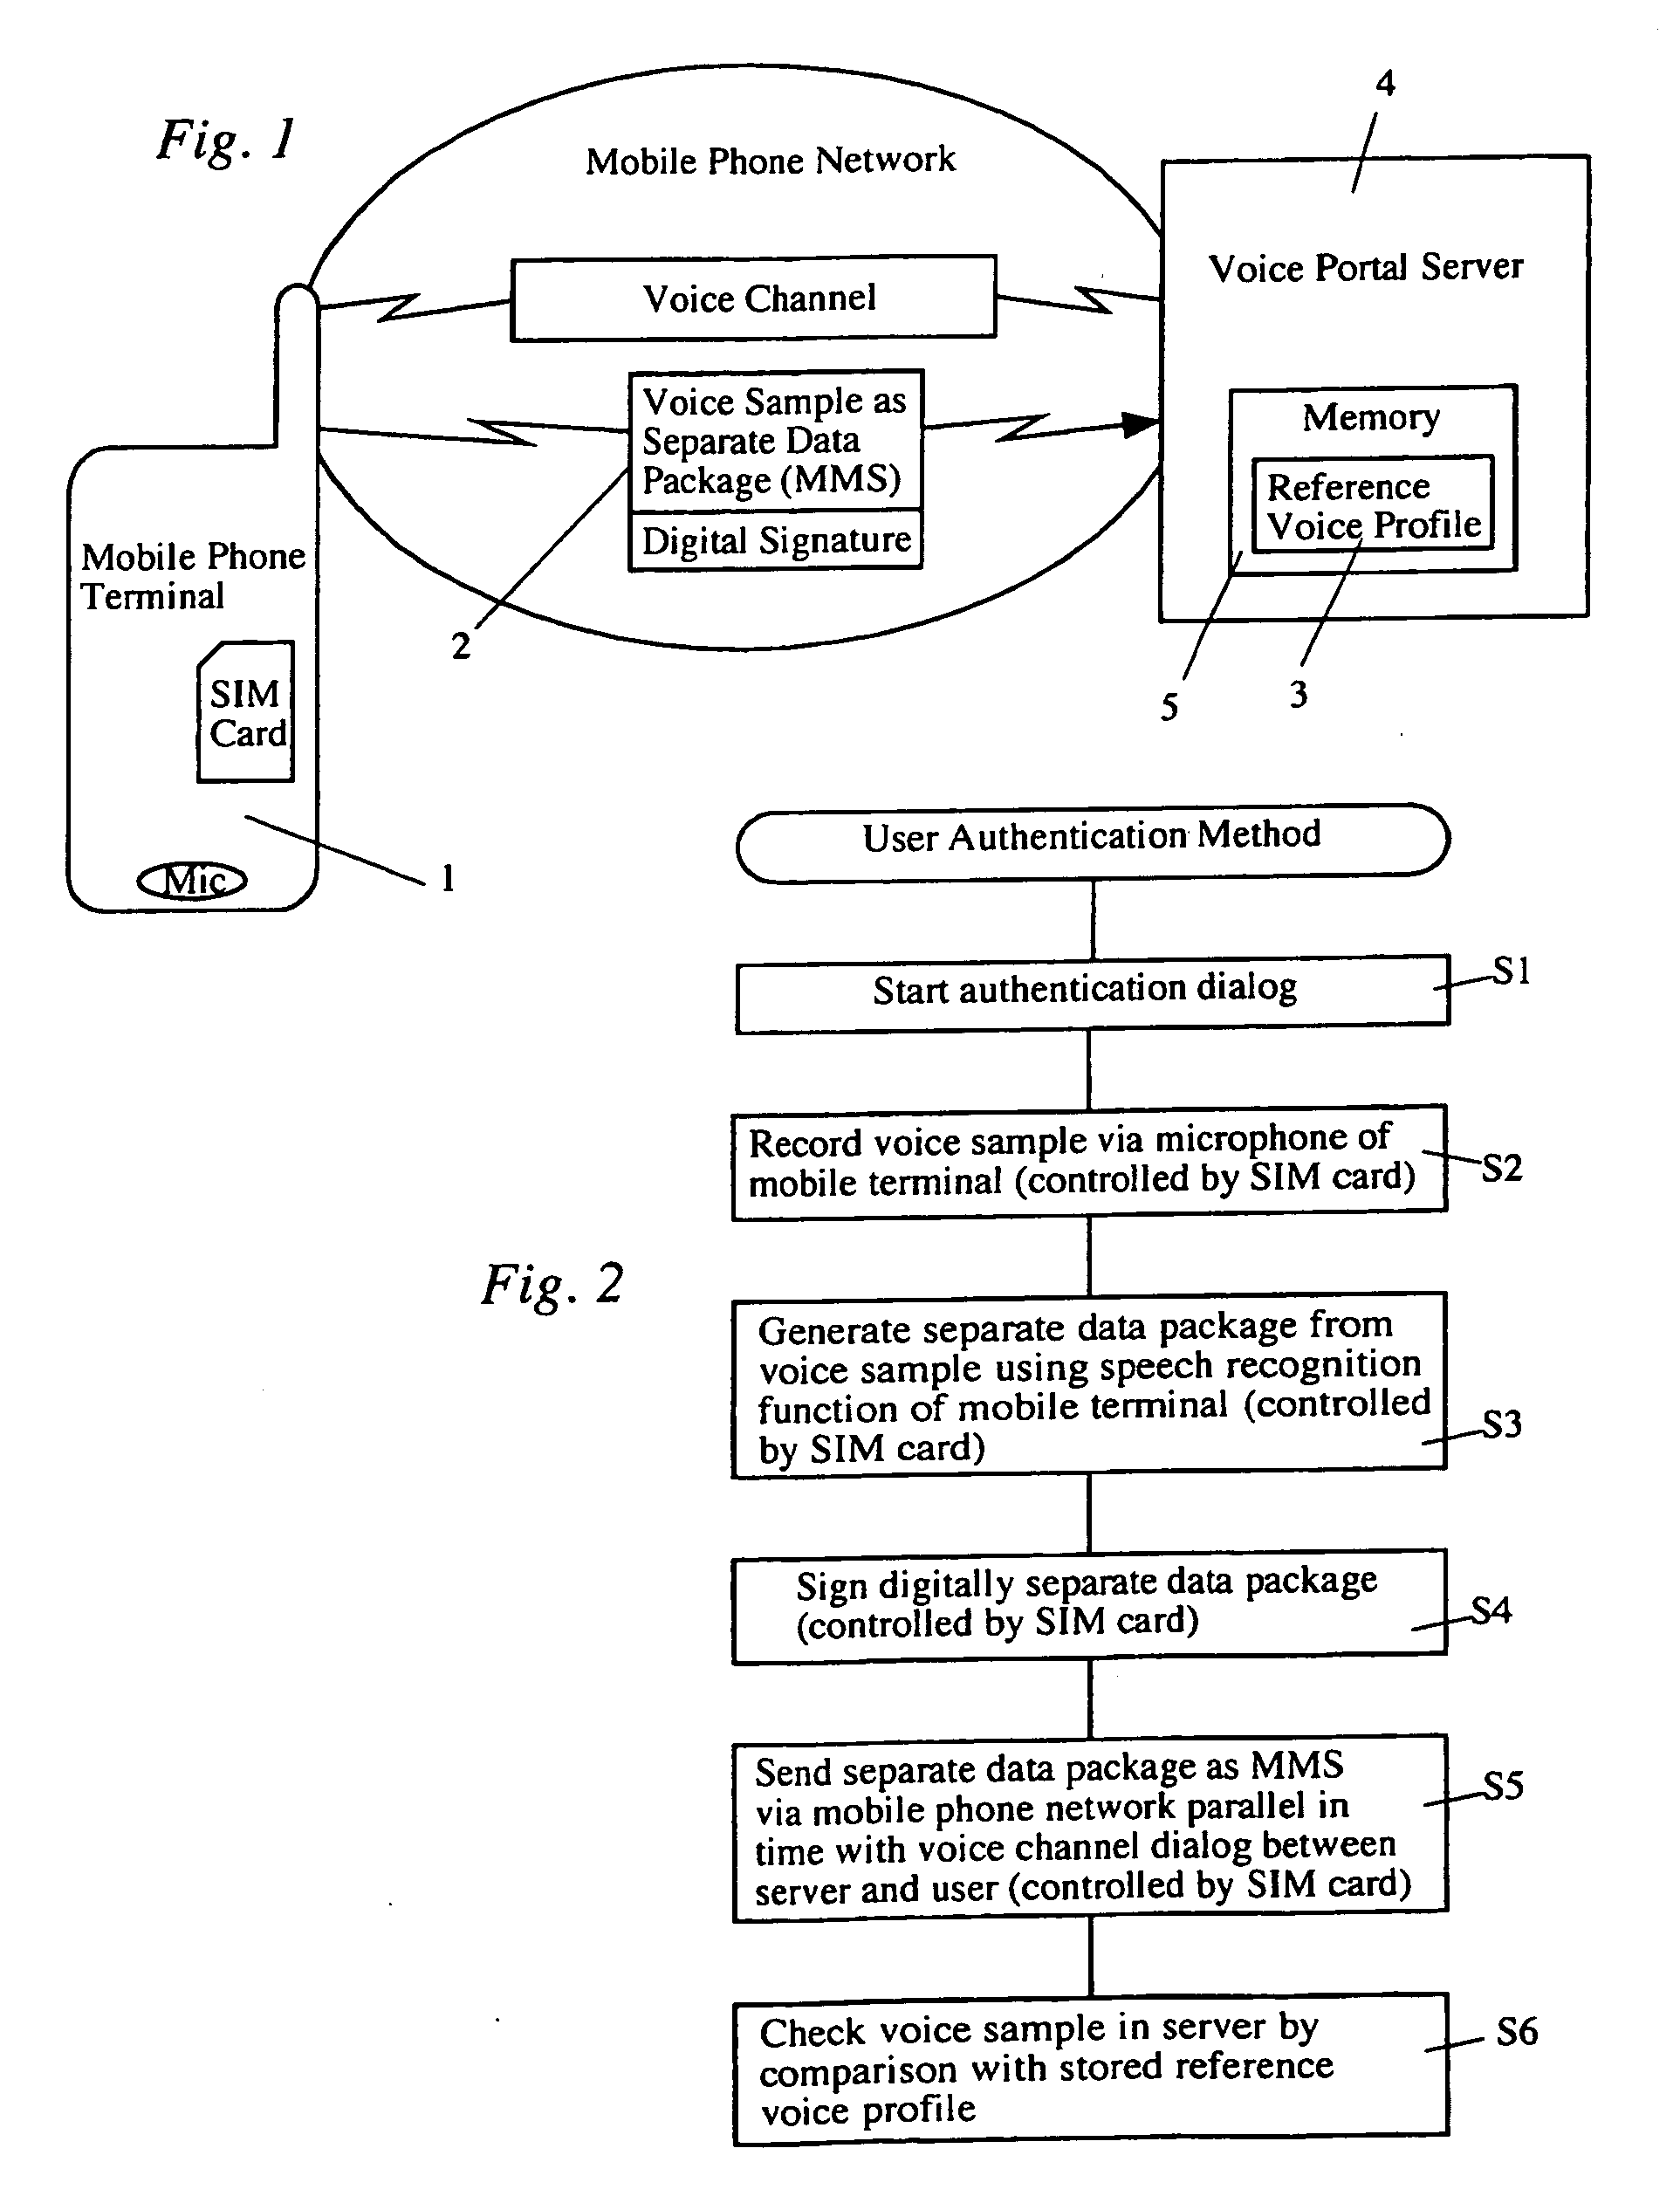 Method for authentication of a user on the basis of his/her voice profile